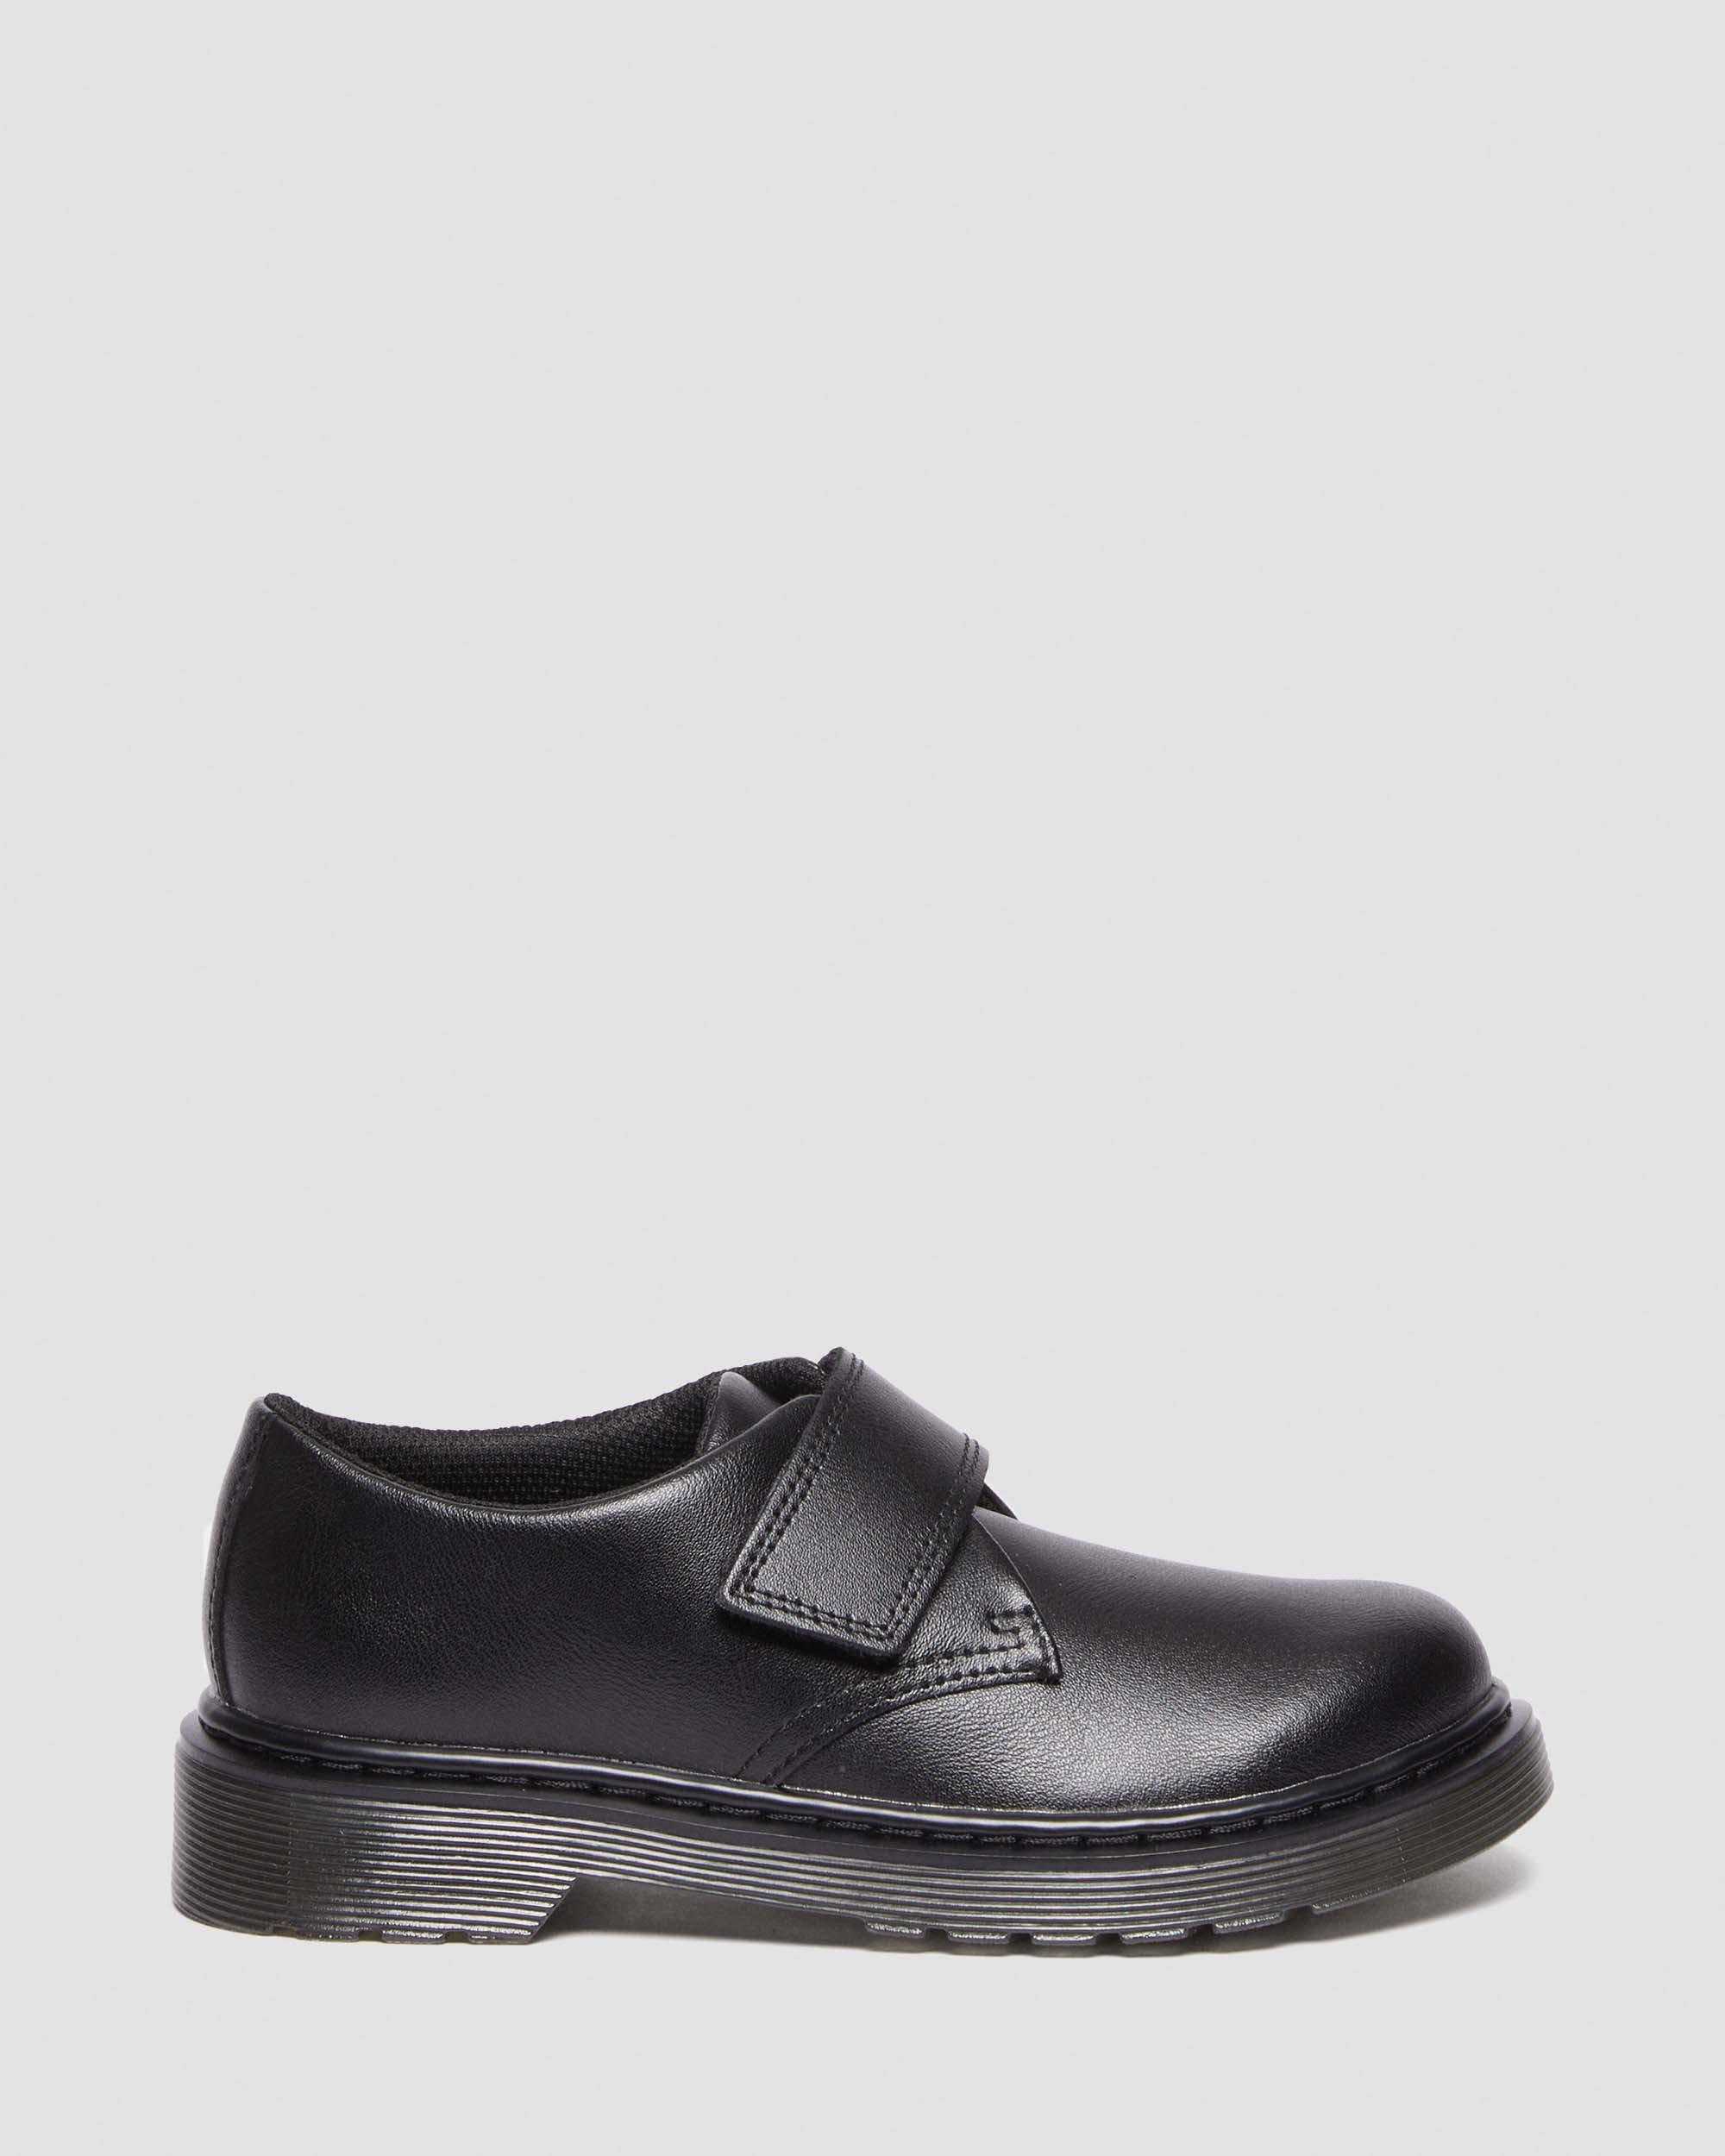 Junior Kamron Leather Strap Velcro Oxford Shoes in Black